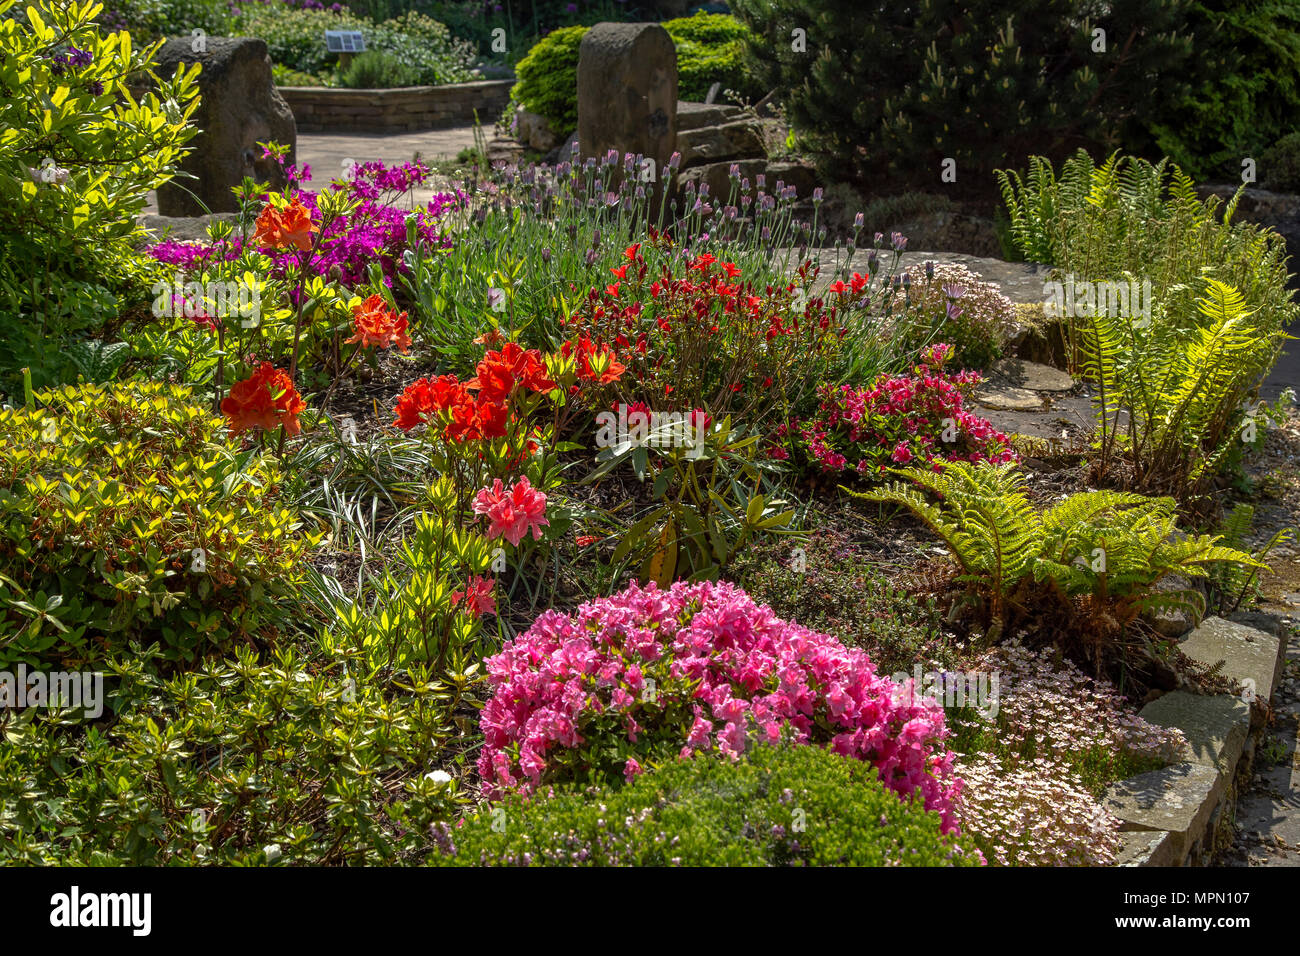 A spring flower bed. Spring colour where azaleas, lavender, ferns and variegated leaves provide colour in the garden. Stock Photo